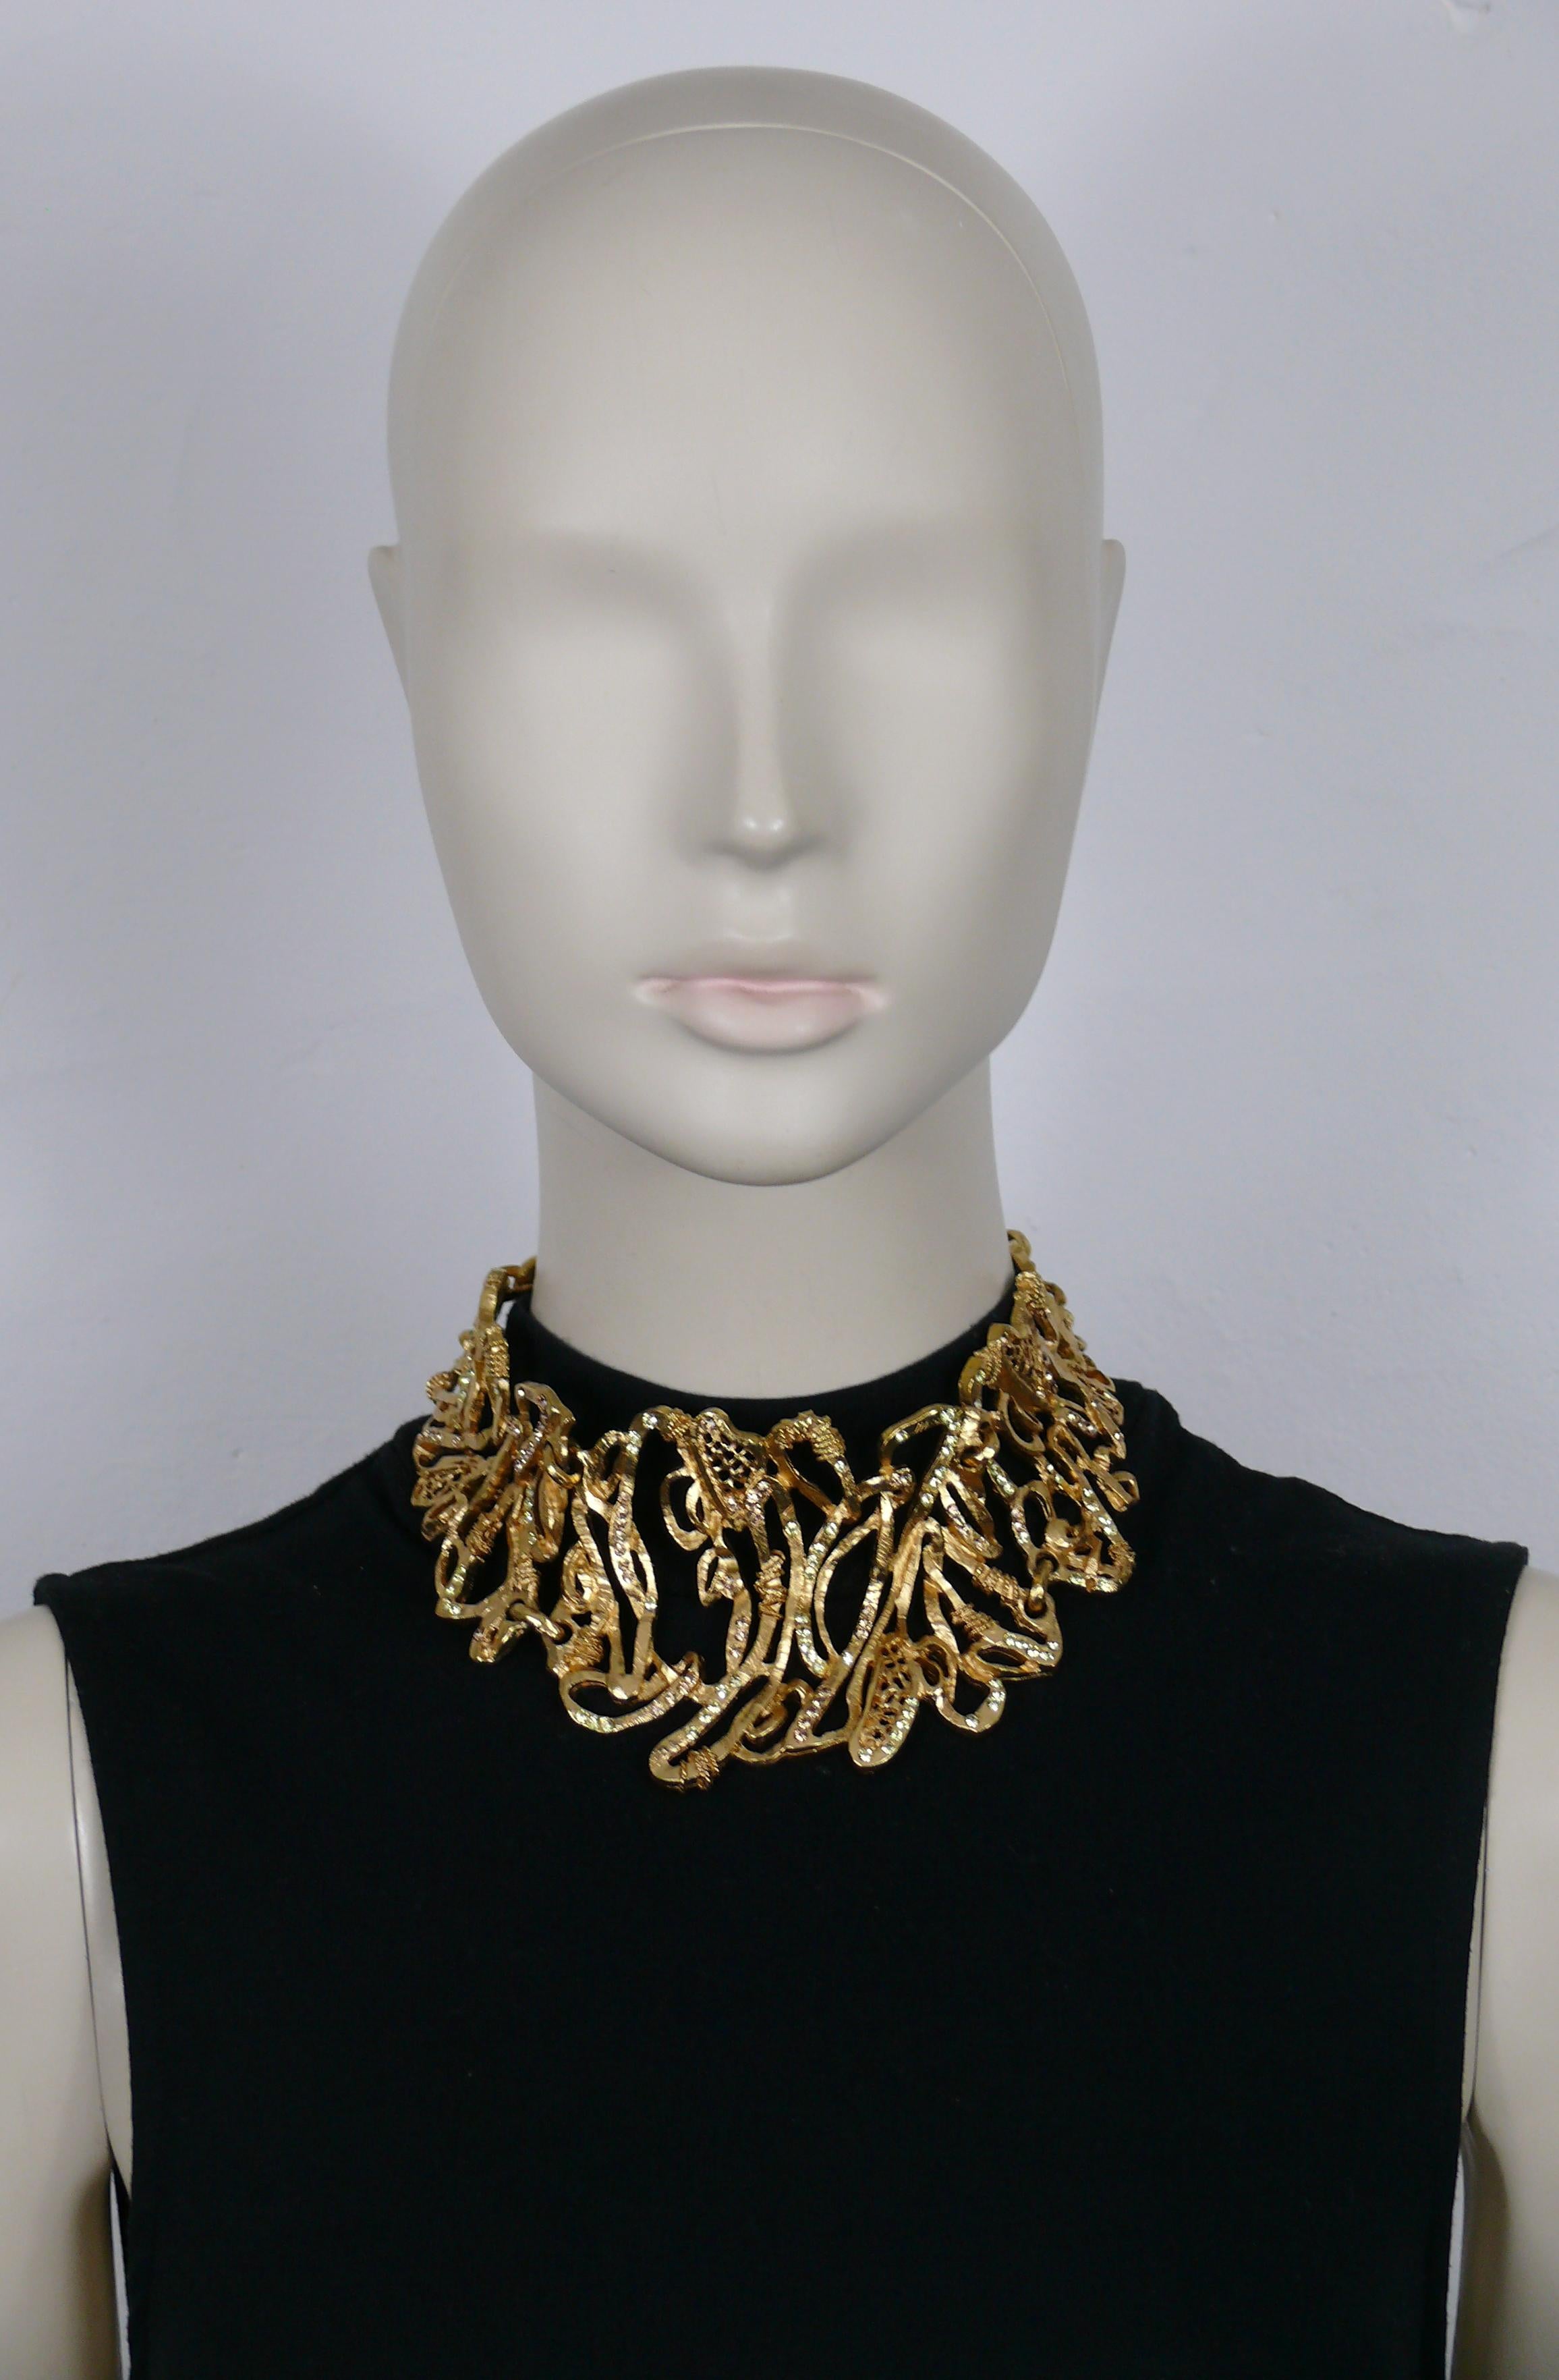 CHRISTIAN LACROIX vintage opulent gold tone chocker necklace featuring an intricate openwork design embellished with jonquil and amber colour crystals.

Adjustable T-bar and toggle closure.

Marked CHRISTIAN LACROIX CL Made in France.

Indicative